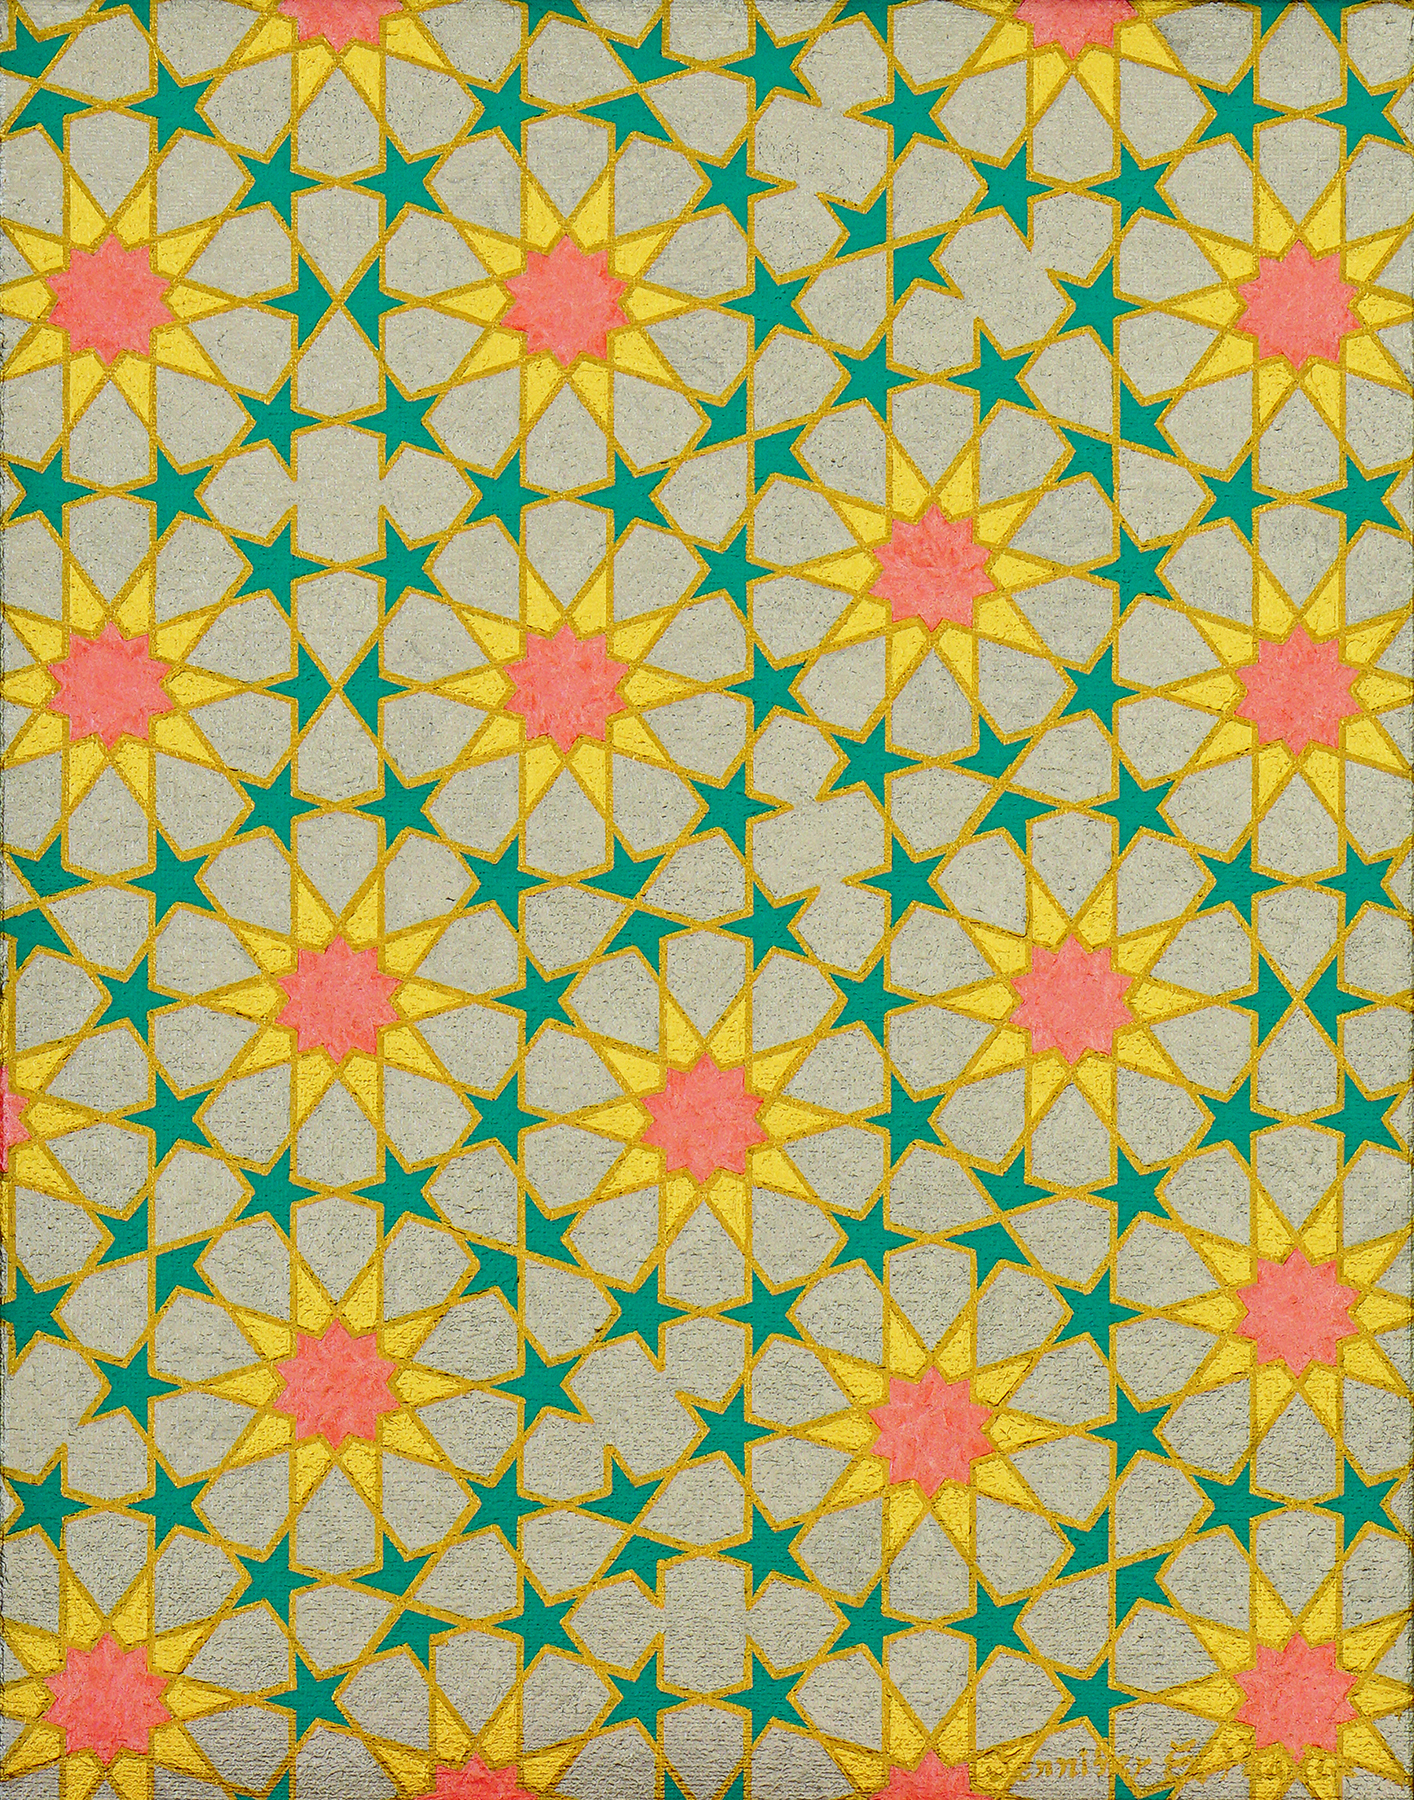 Painting of a Penrose tiling with an Islamic geometric motif